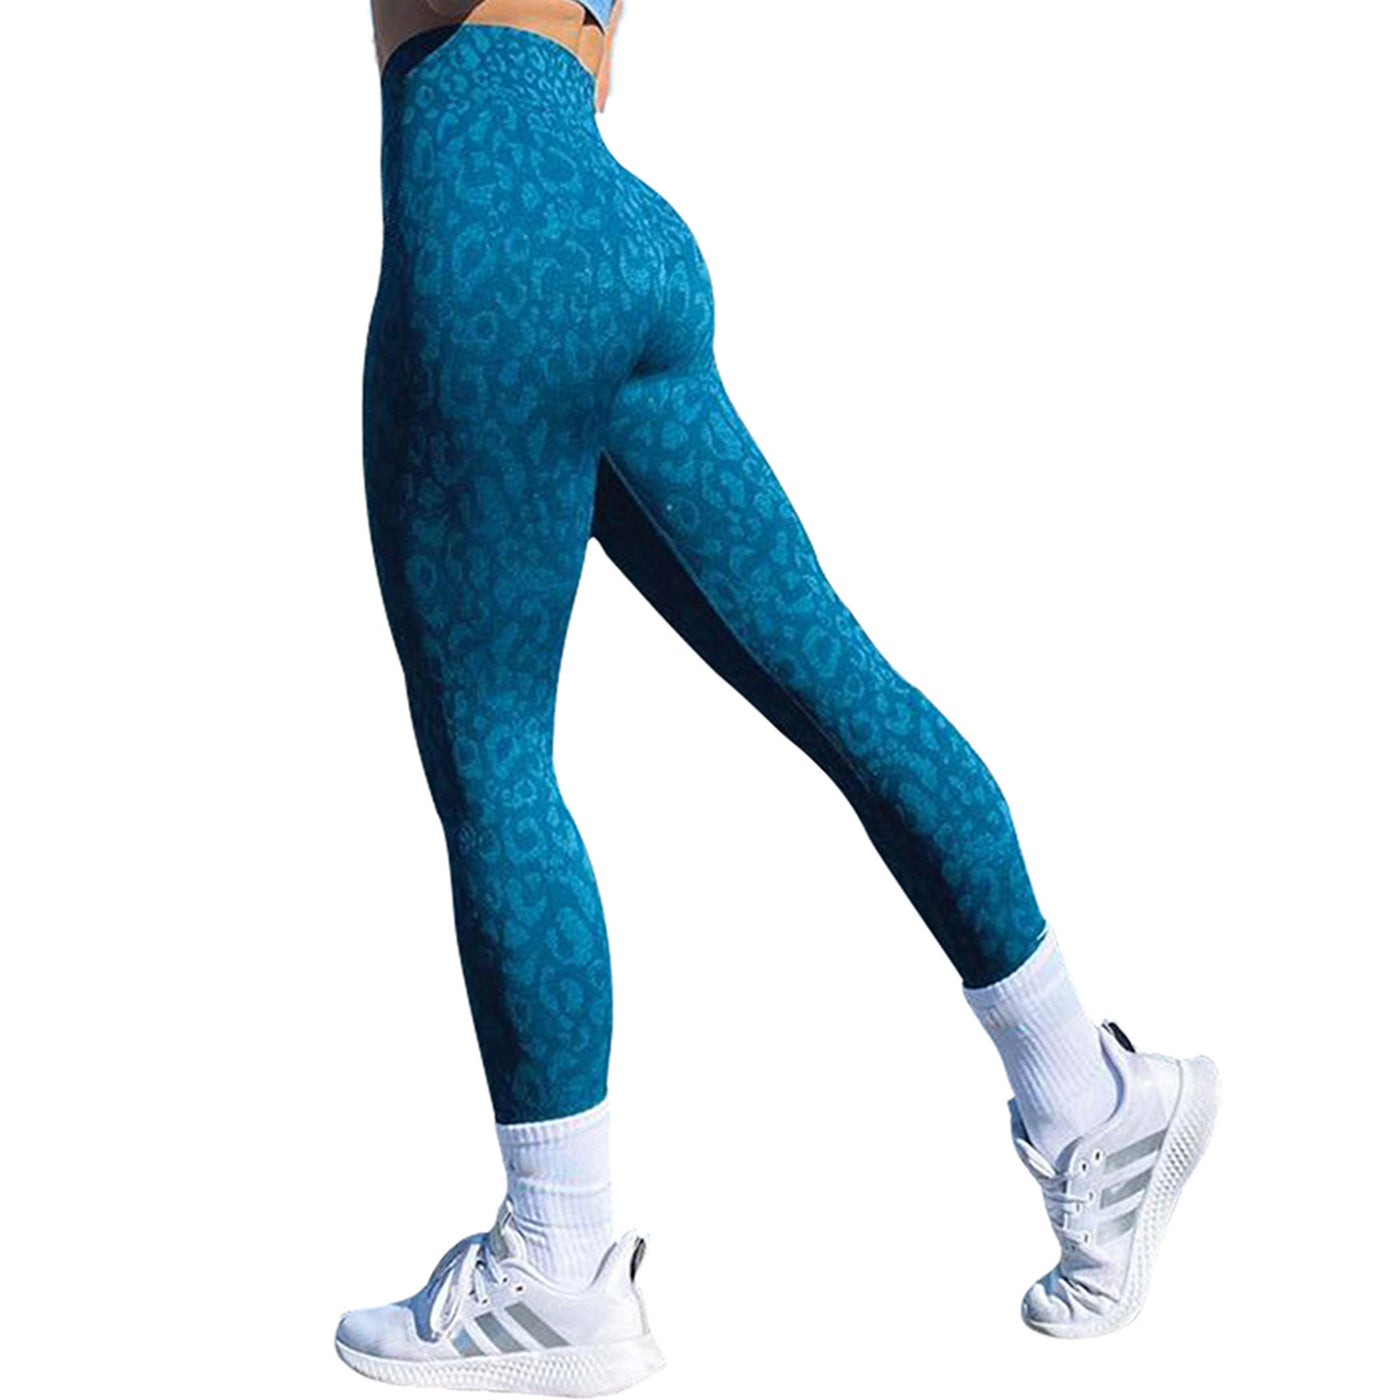 High-Waisted Push Up Booty Leggings for Women - Workout, Gym, Fitness, and Yoga Pants - Blue leopard print - Leggings - Carvan Mart